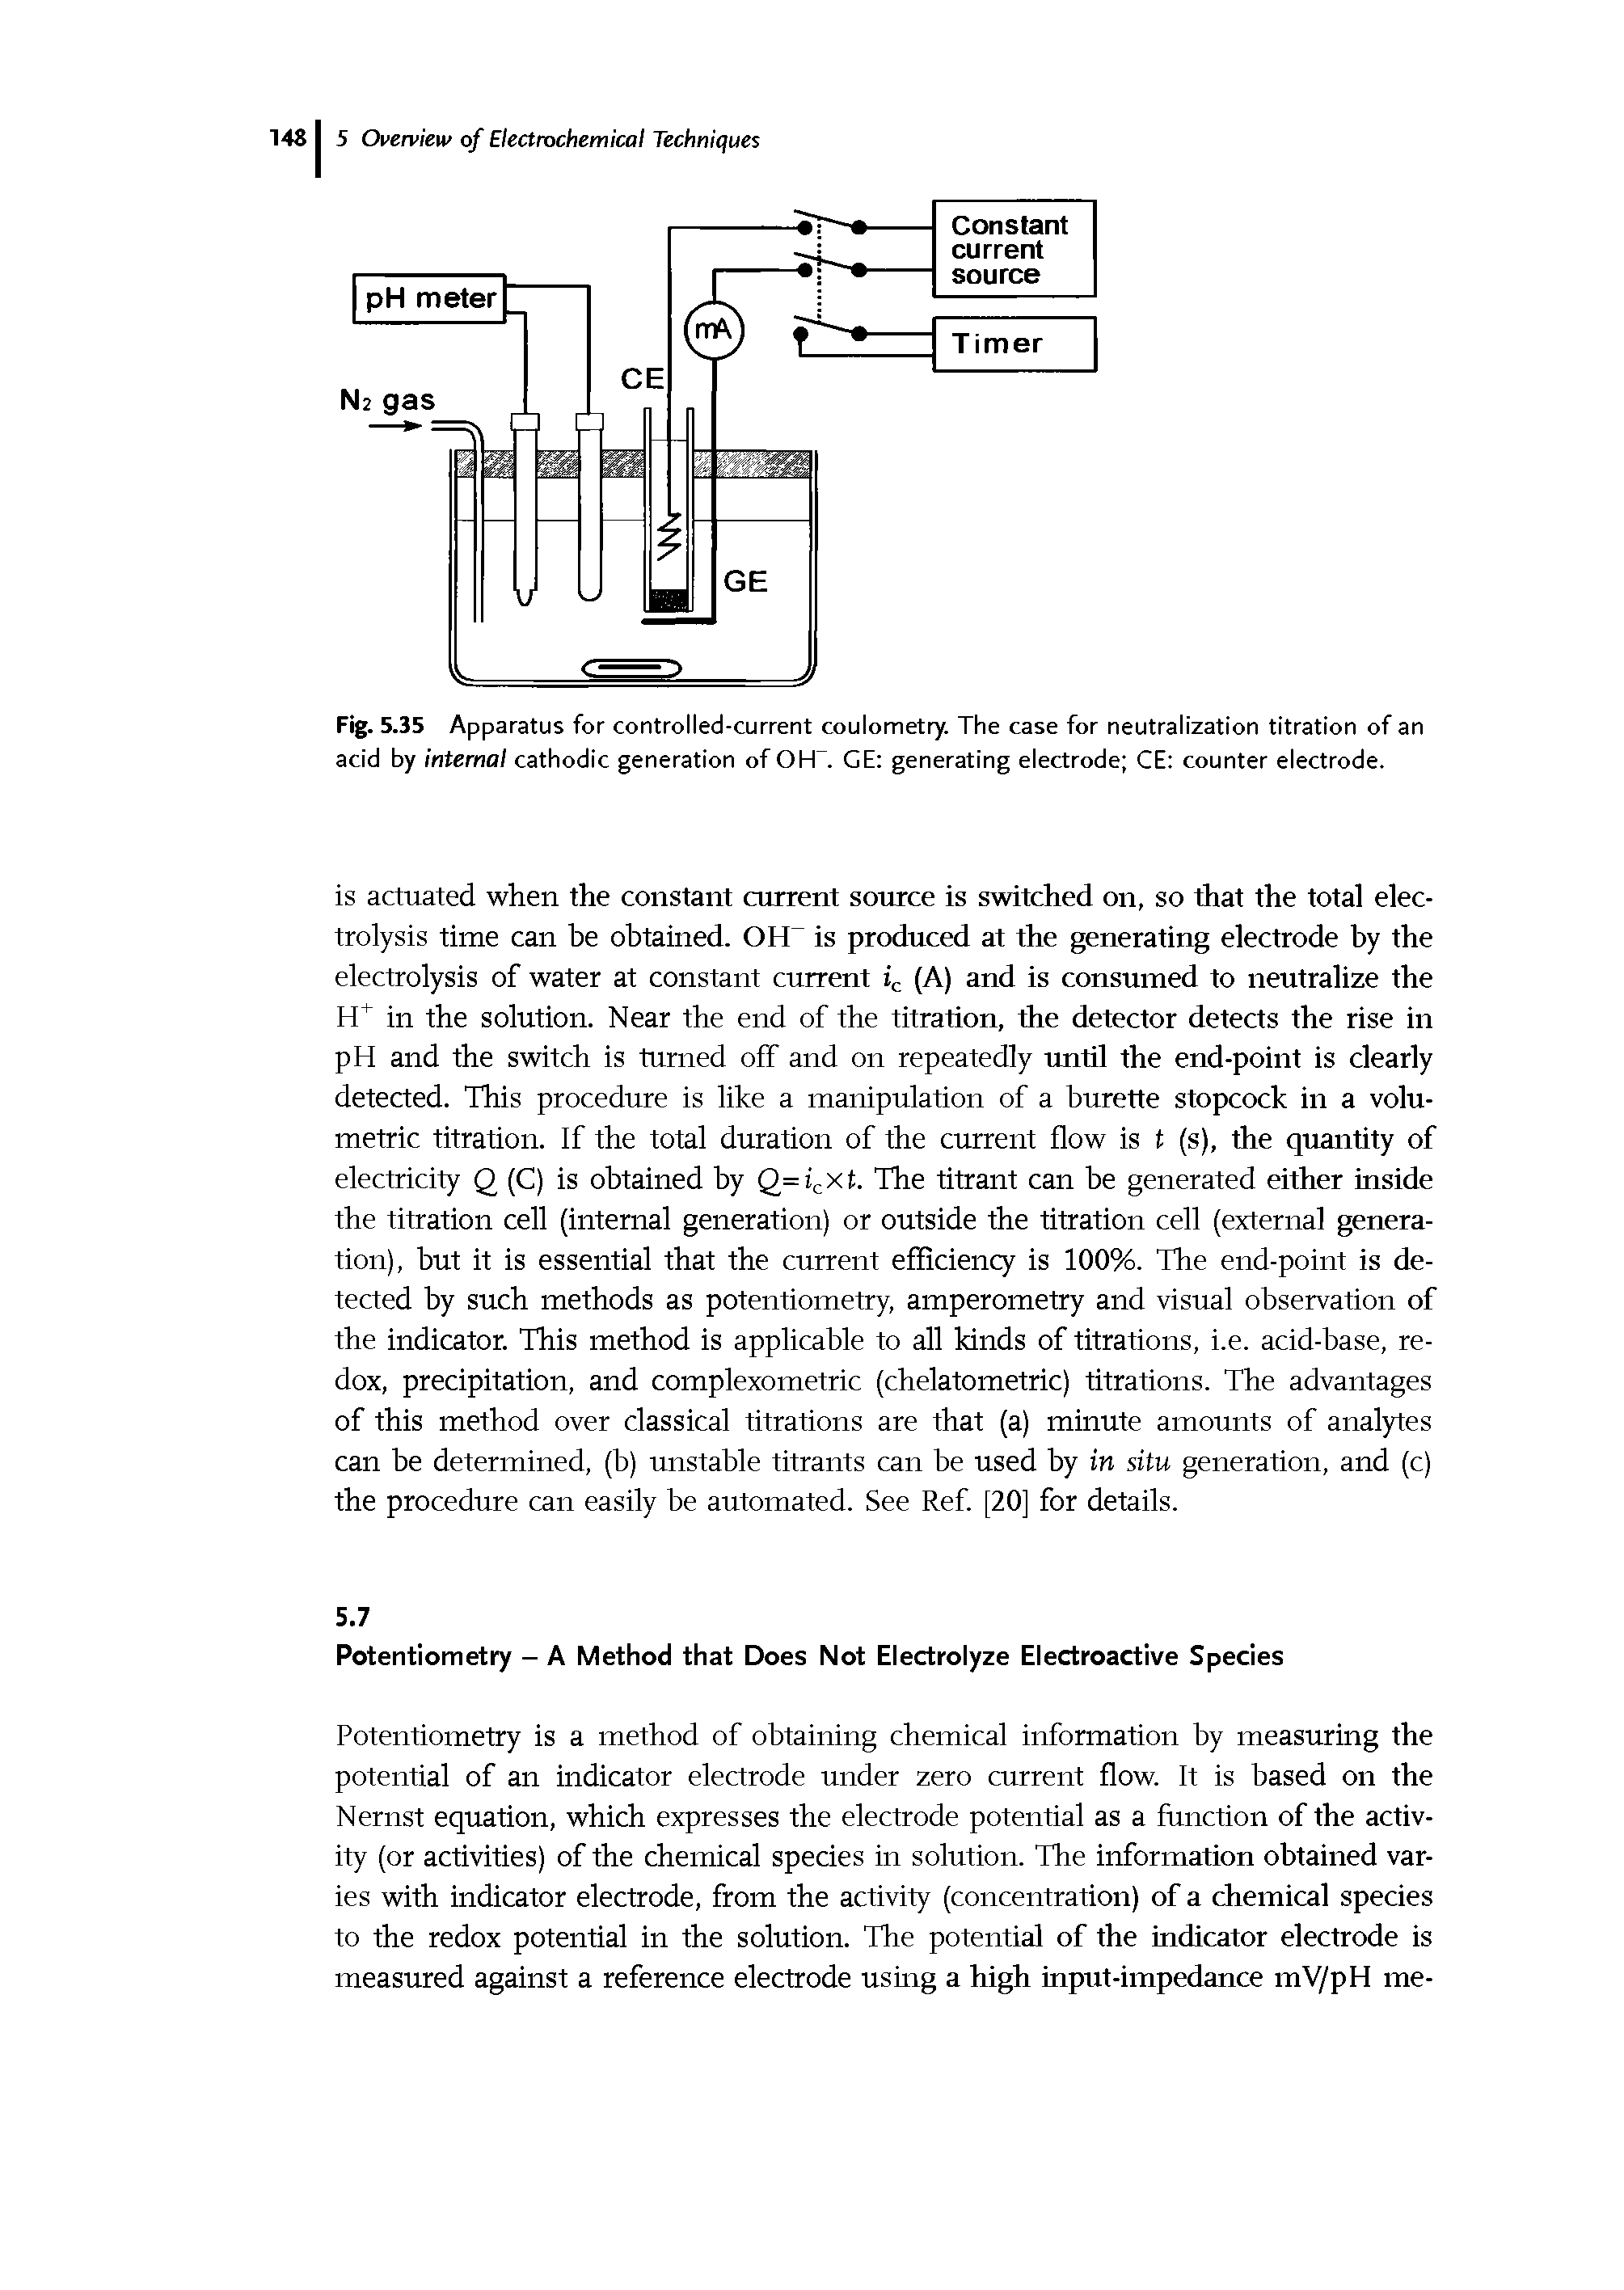 Fig. 5.35 Apparatus for controlled-current coulometry. The case for neutralization titration of an acid by internal cathodic generation of OhT. GE generating electrode CE counter electrode.